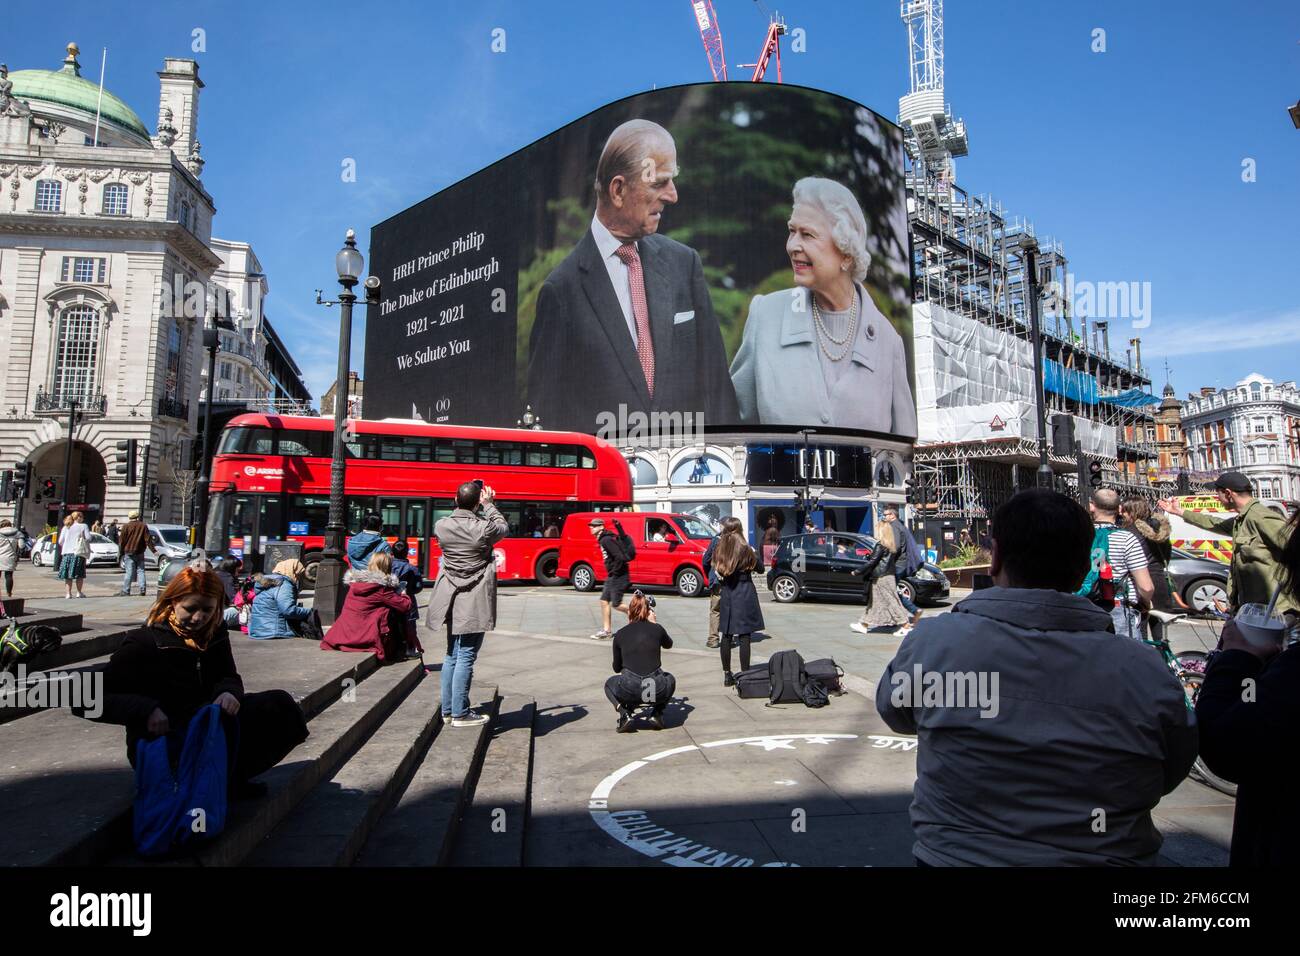 People stop to look at the famous advertising screen at Piccadilly Circus as it displayed a tribute for Prince Philip, on the day of his funeral, UK Stock Photo